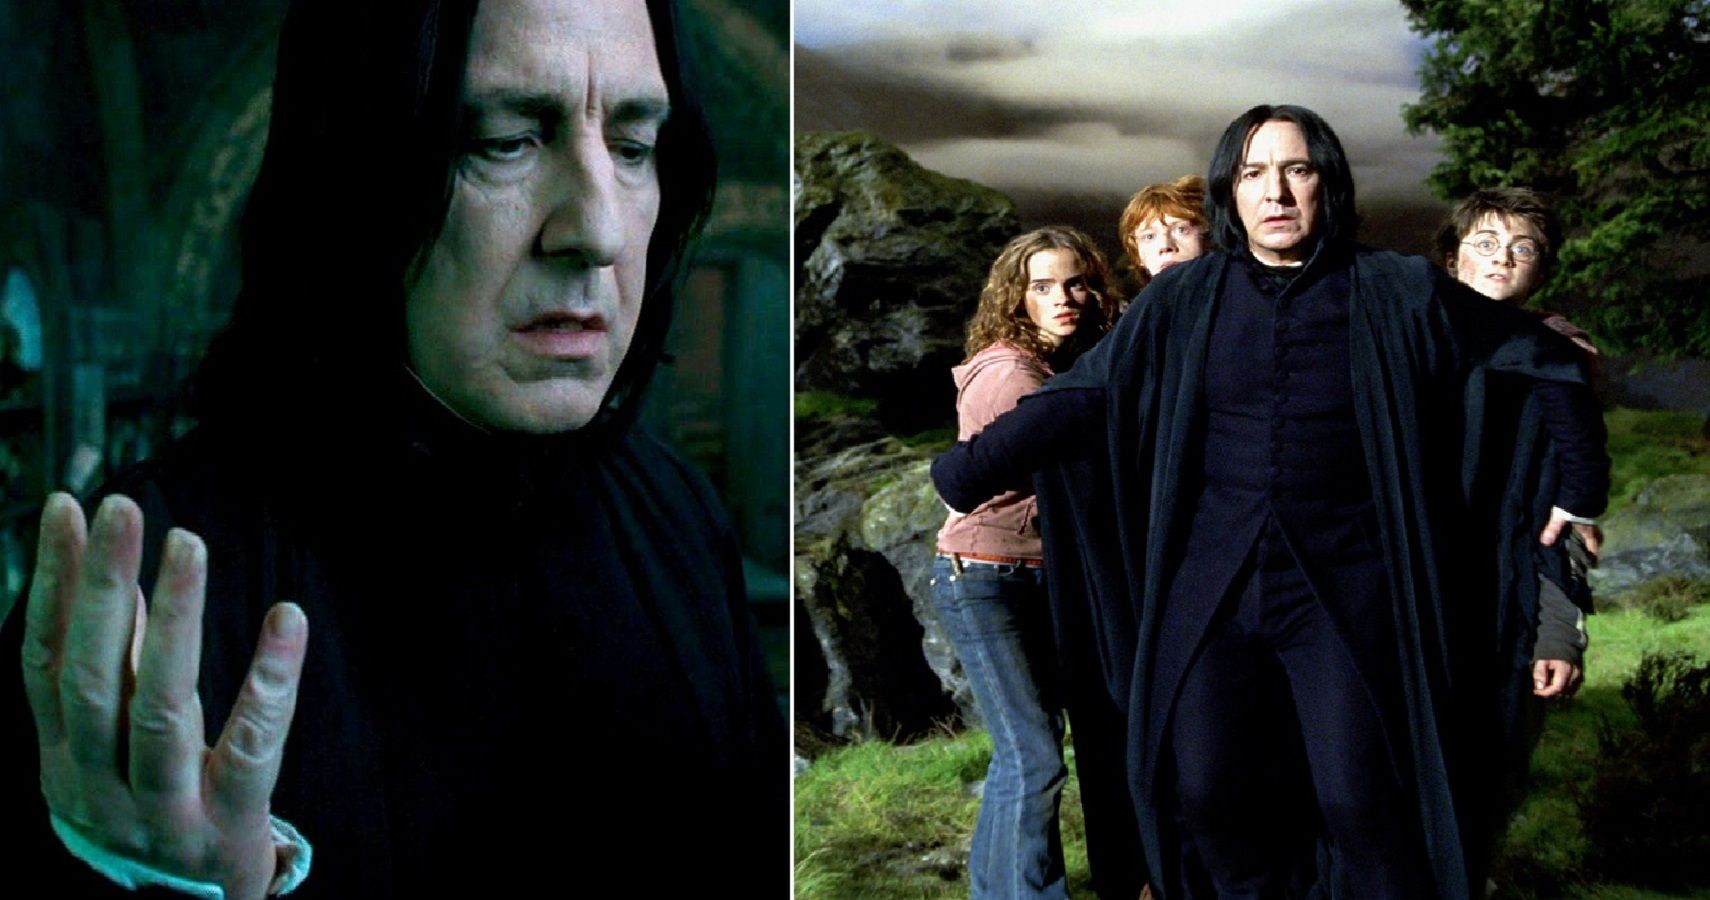 The Harry Potter Movies: The Evolution of Snape's Character and Redemption